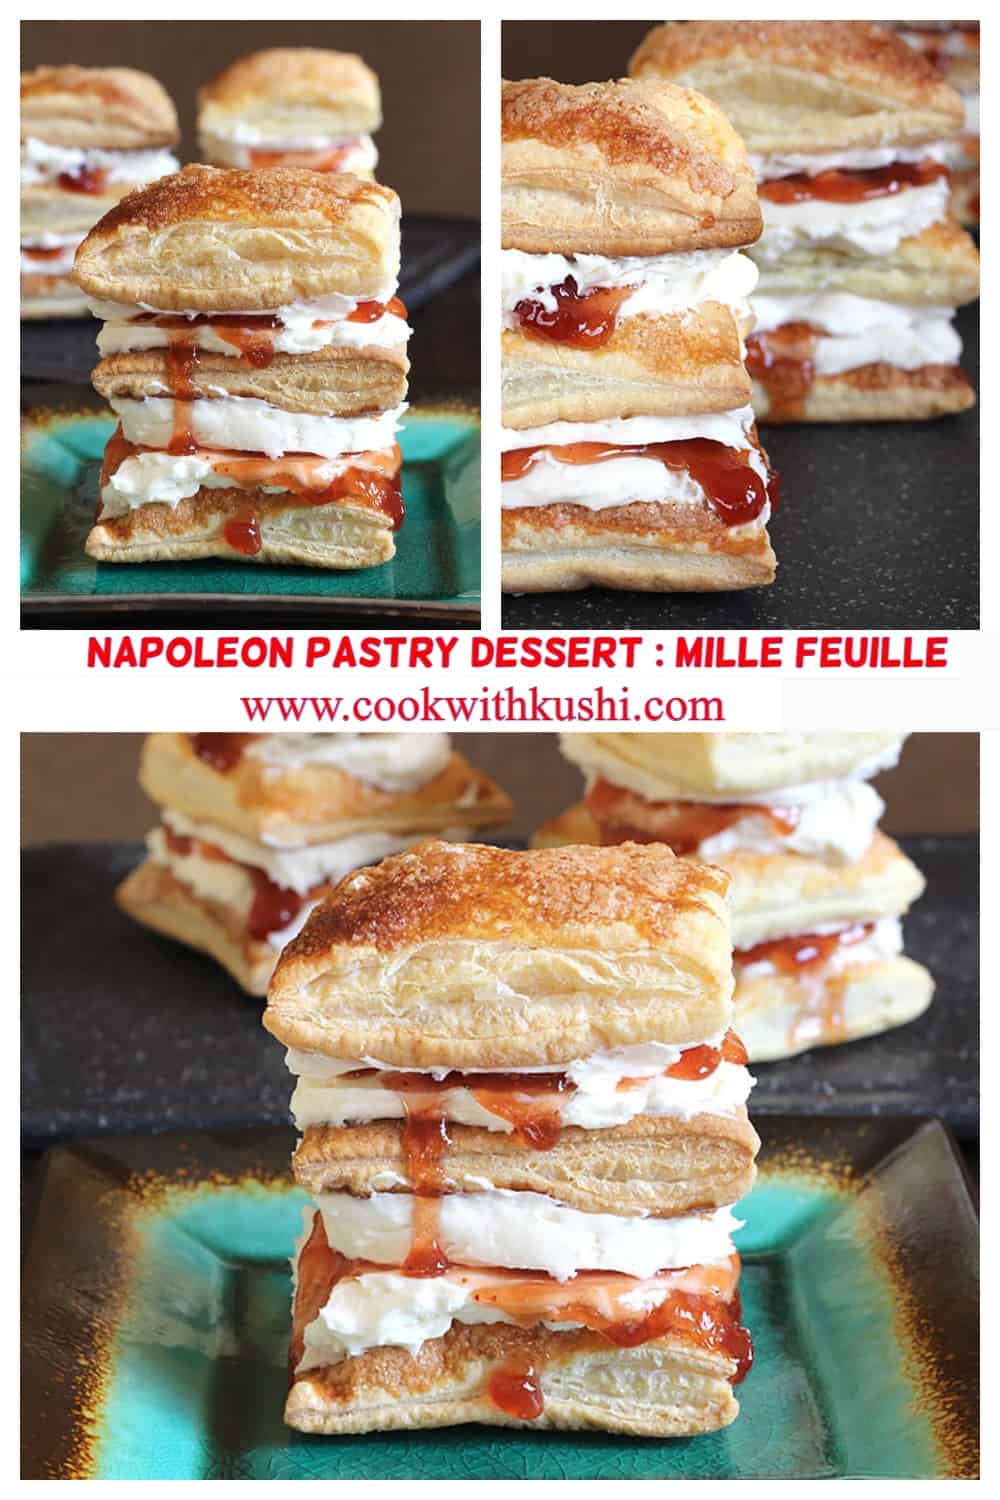 3 different images of best Italian and French pastry dessert napoleon, mille feuille